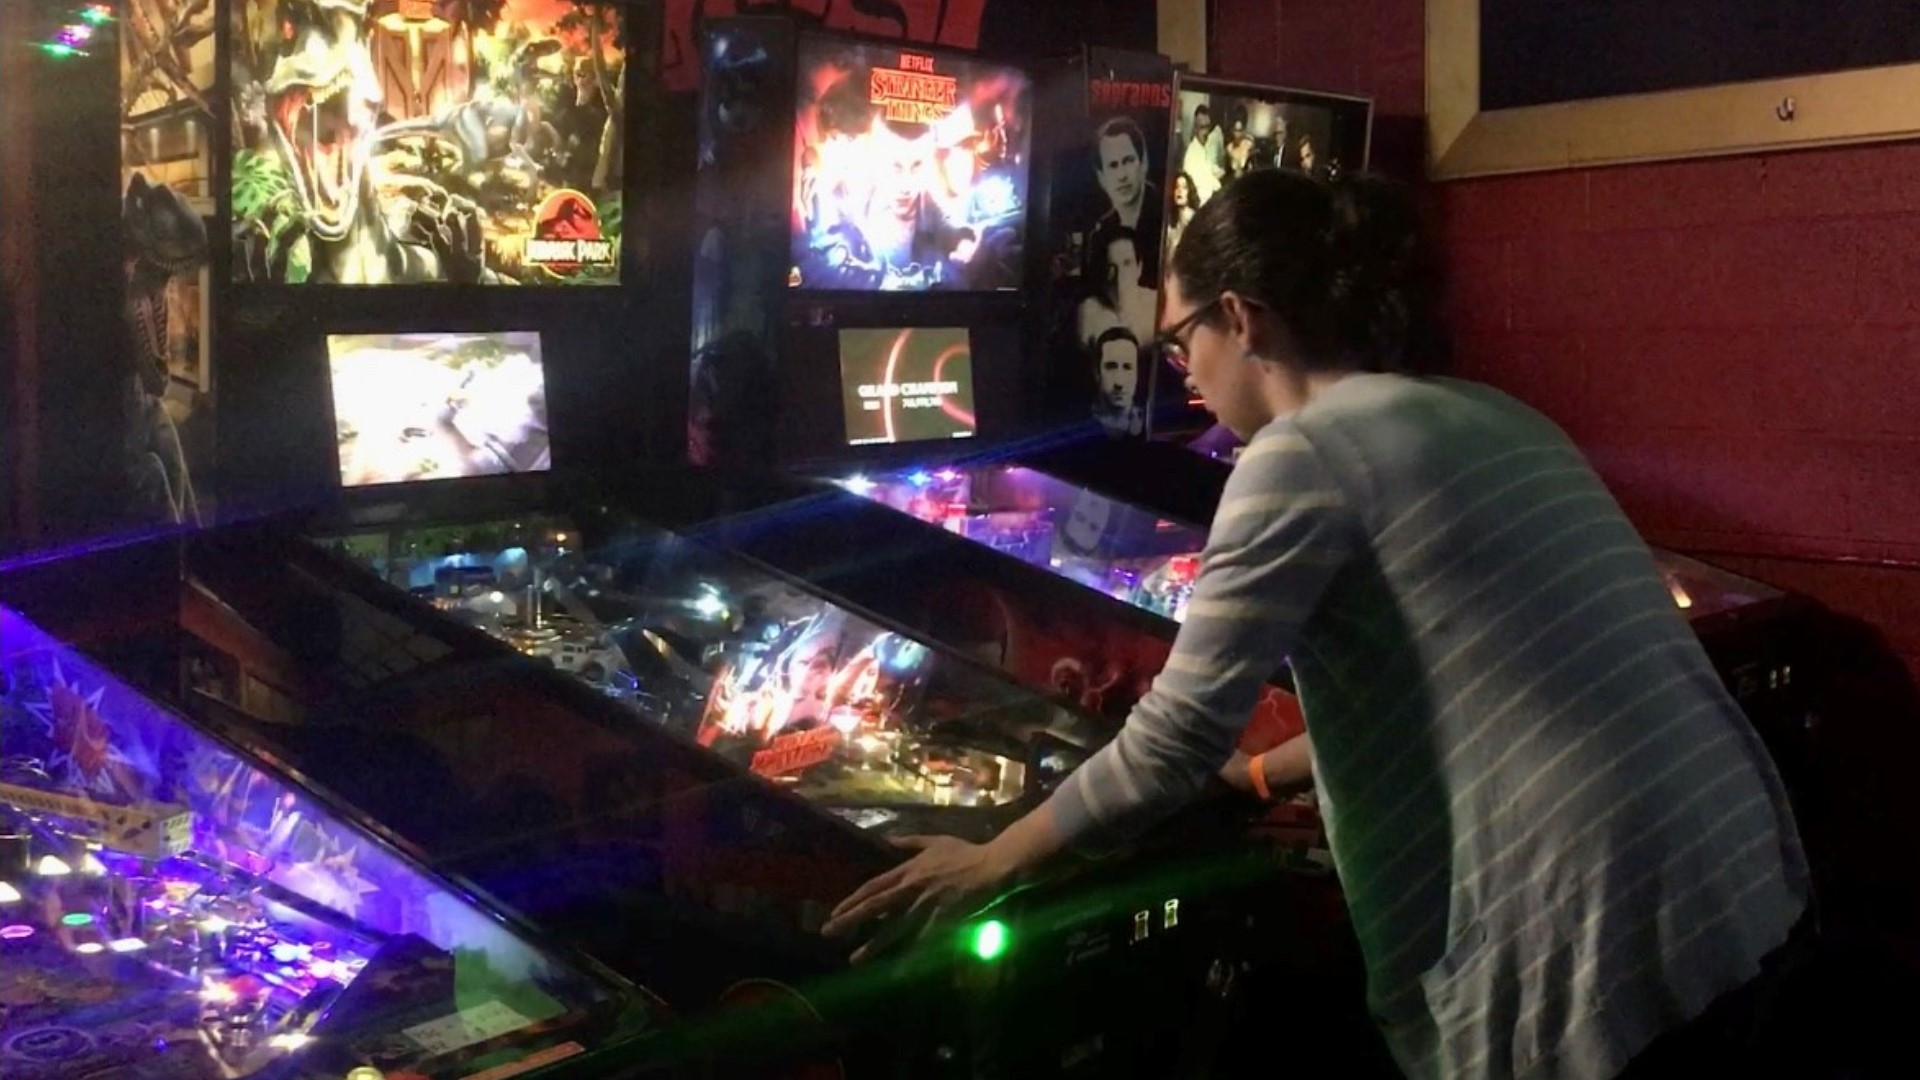 Portland boasts more pinball machines per capita than anywhere in the U.S. and is home to one of the best pinball players in the world.